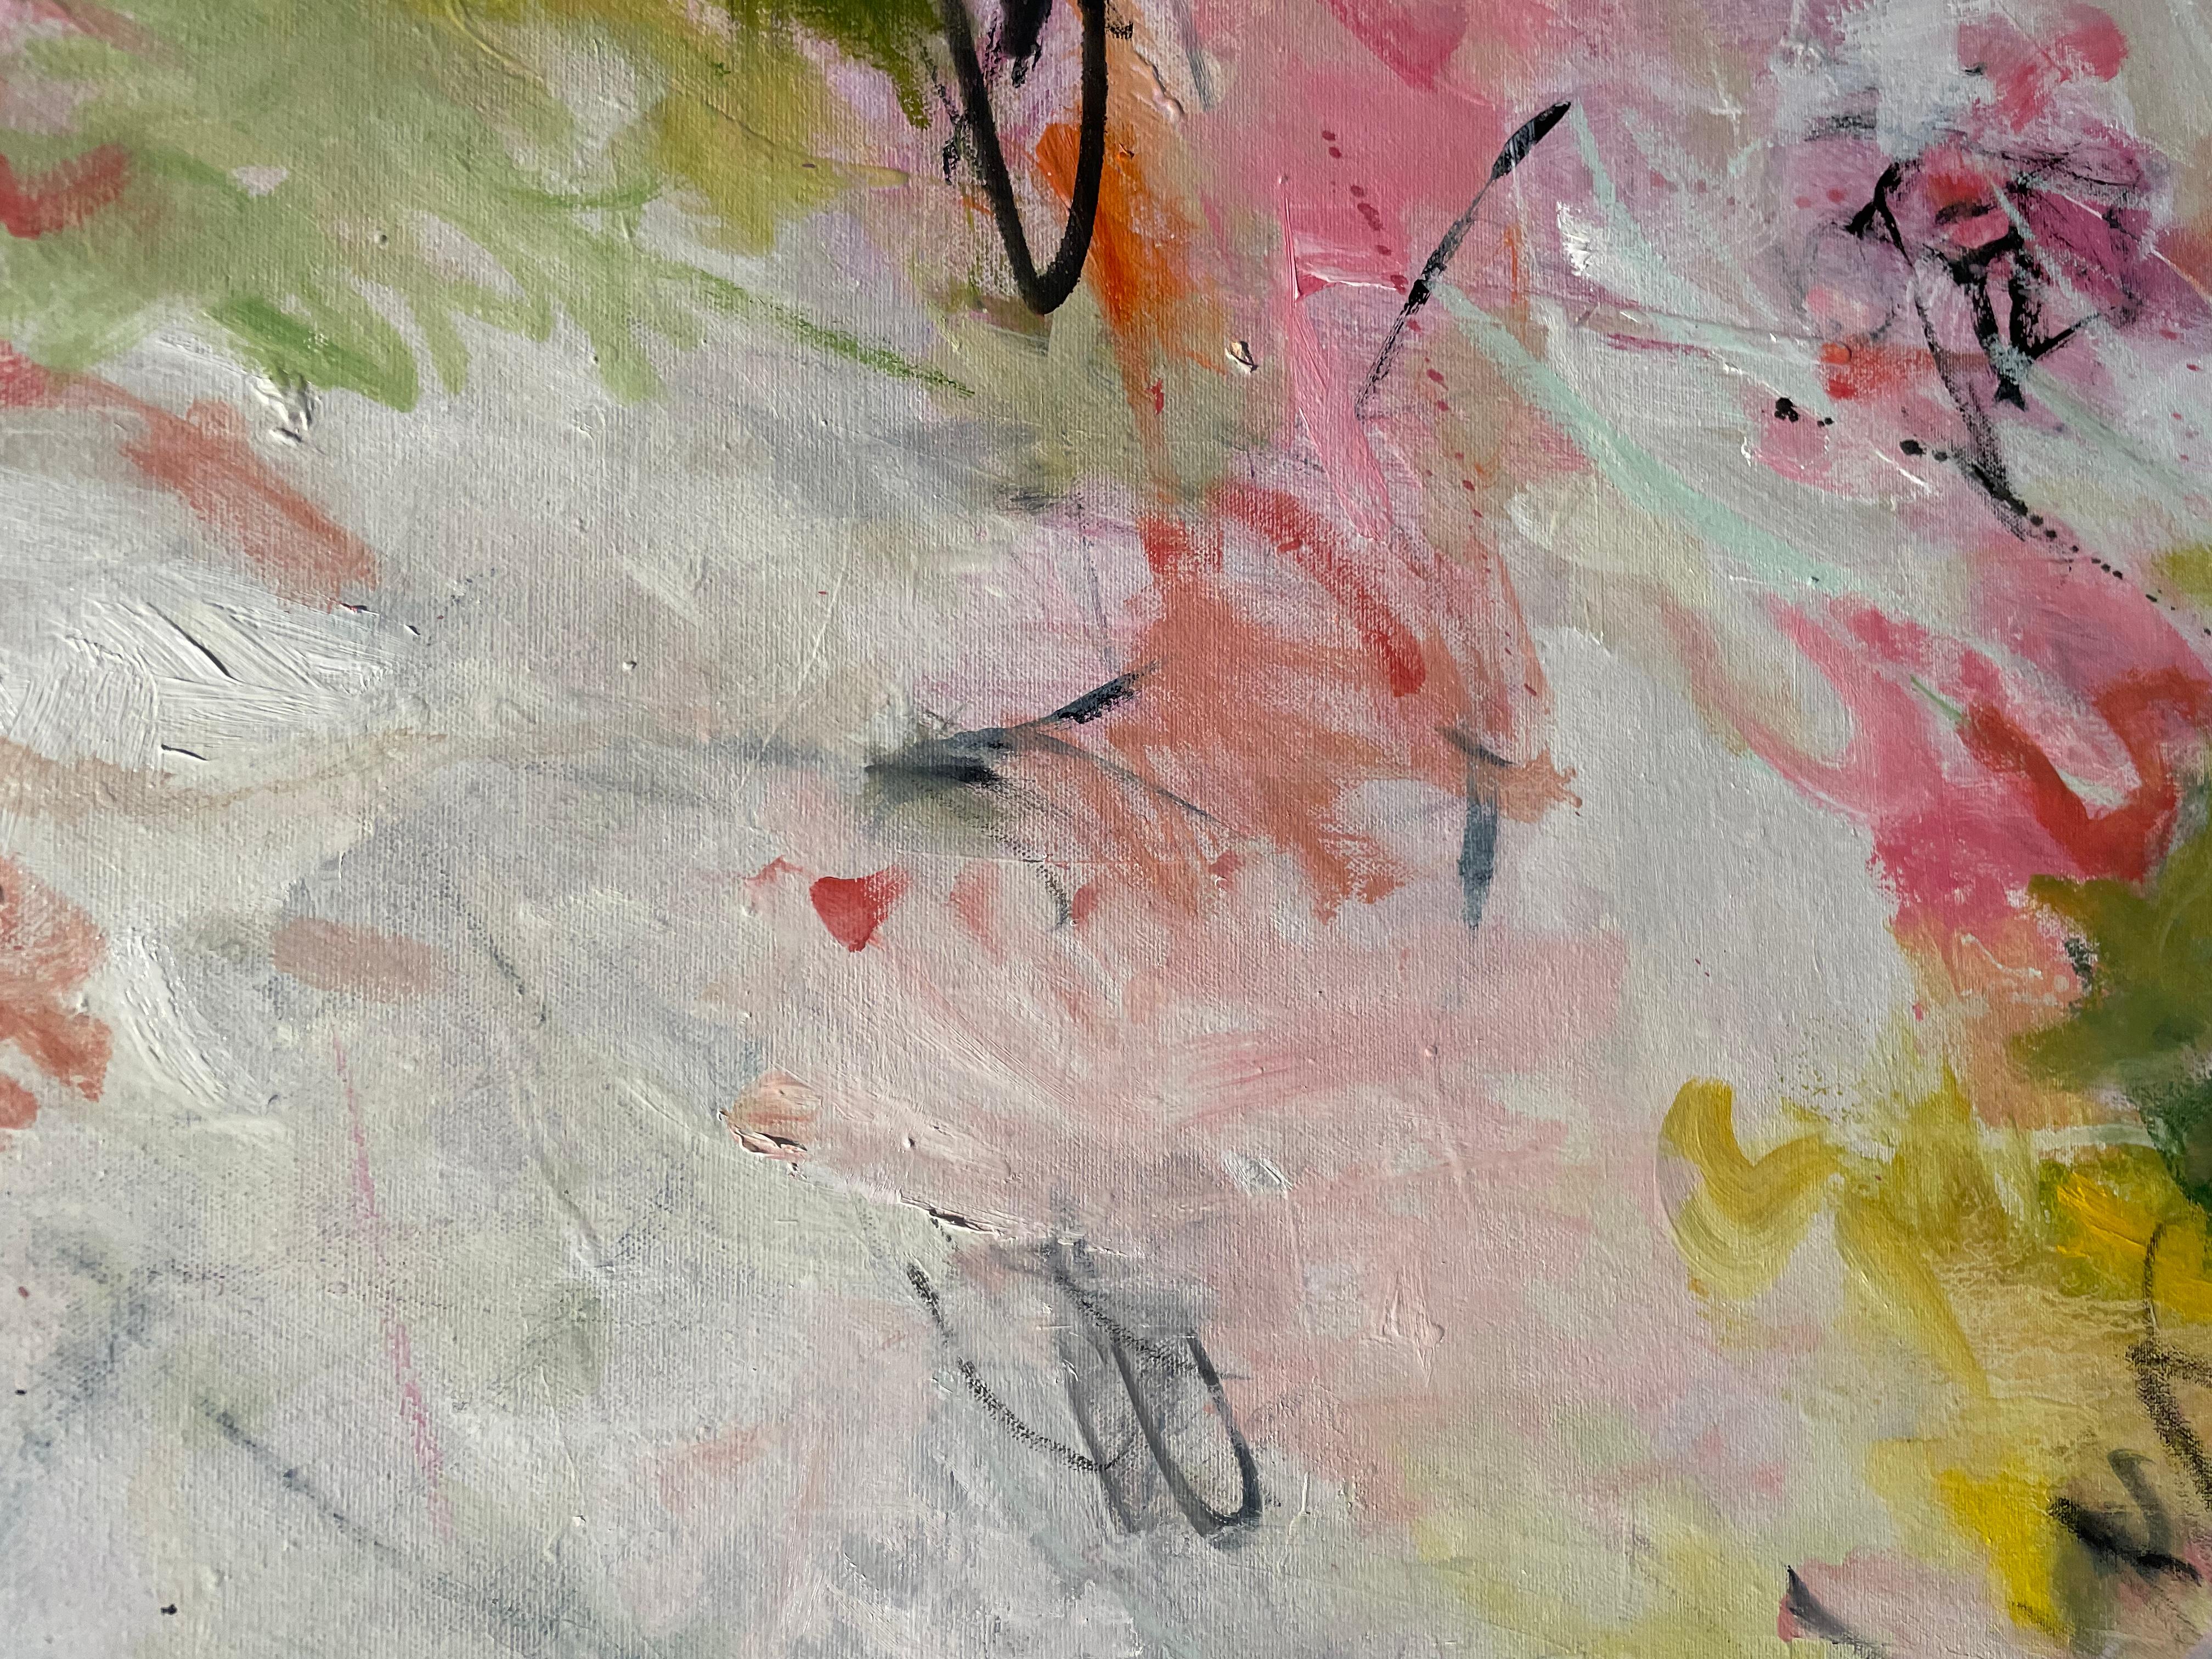 Large abstract original painting in pinks and soft green titled 'Her Wild Heart' - Abstract Expressionist Mixed Media Art by Michele Zuzalek